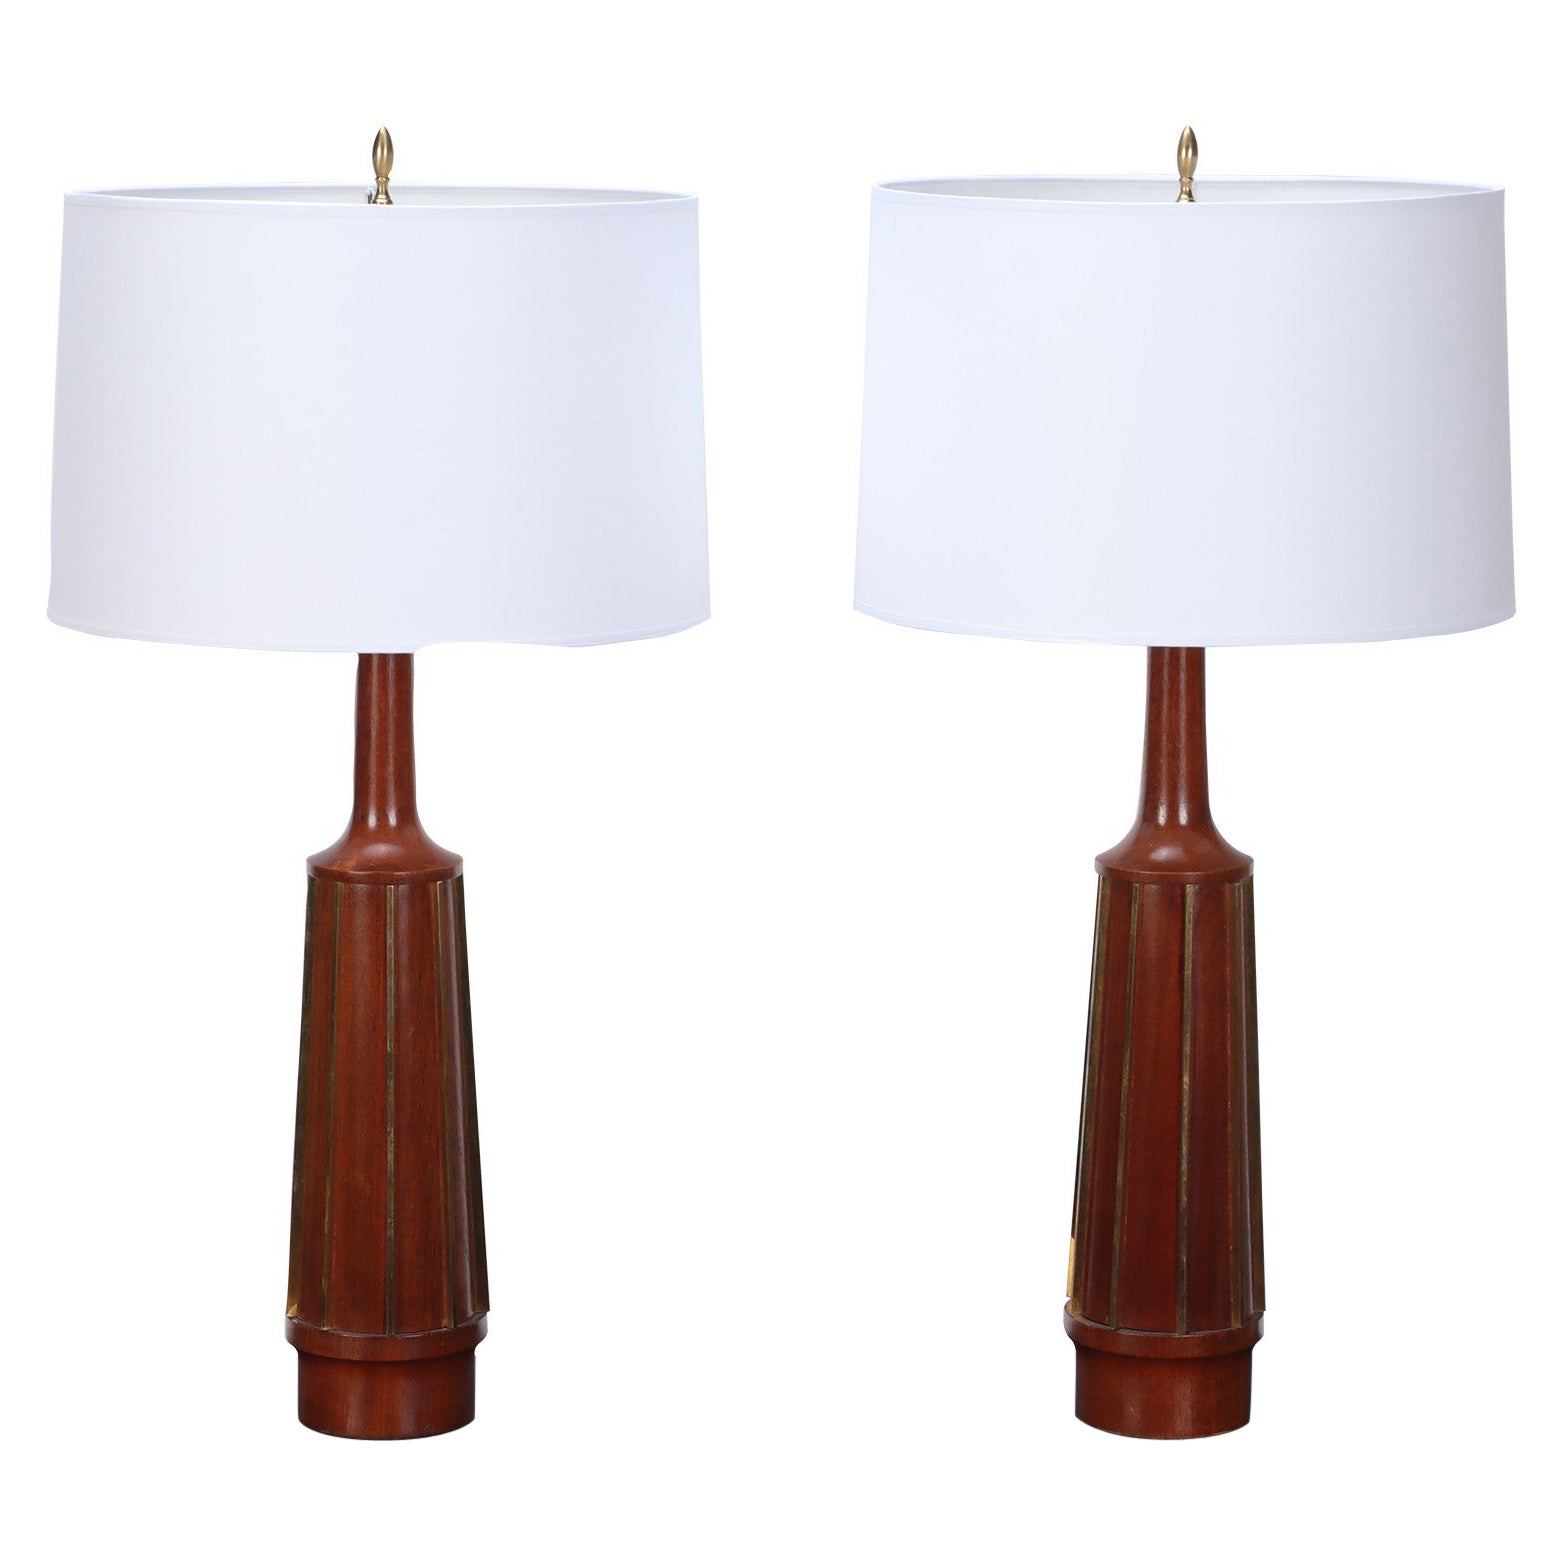 Pair of Mid Century Modern Table Lamps by G. Thurston, circa 1950 For Sale